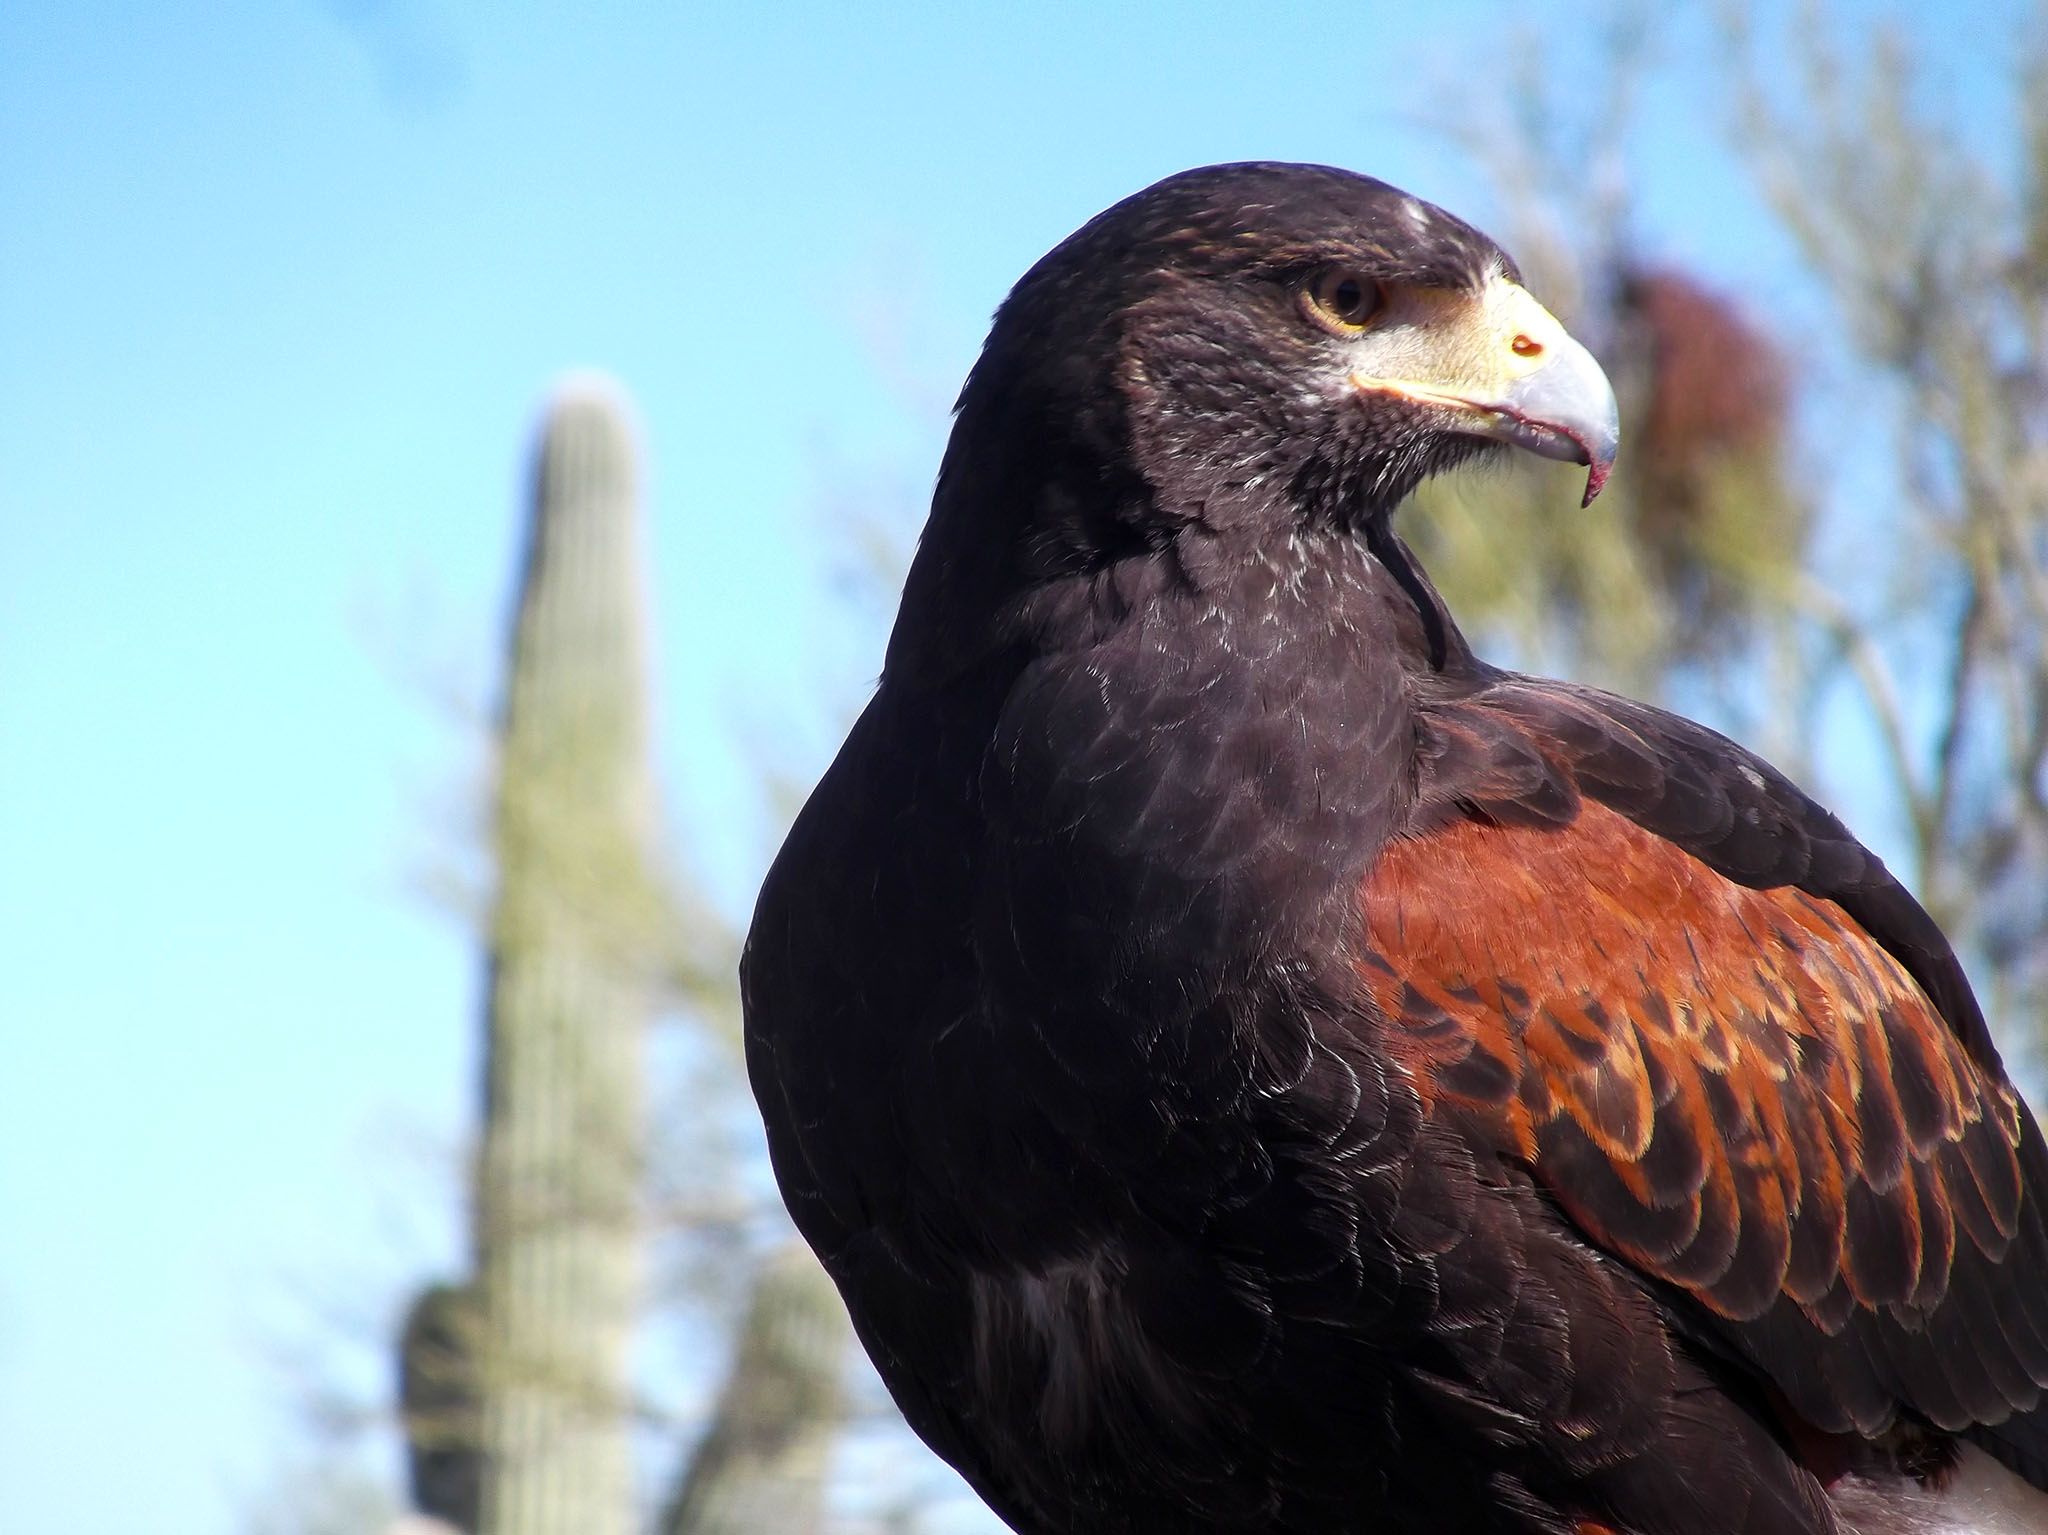 Arizona: Harris's Hawk in Sonoran Desert. This image is from The Desert Sea. [Photo of the day - April 2017]